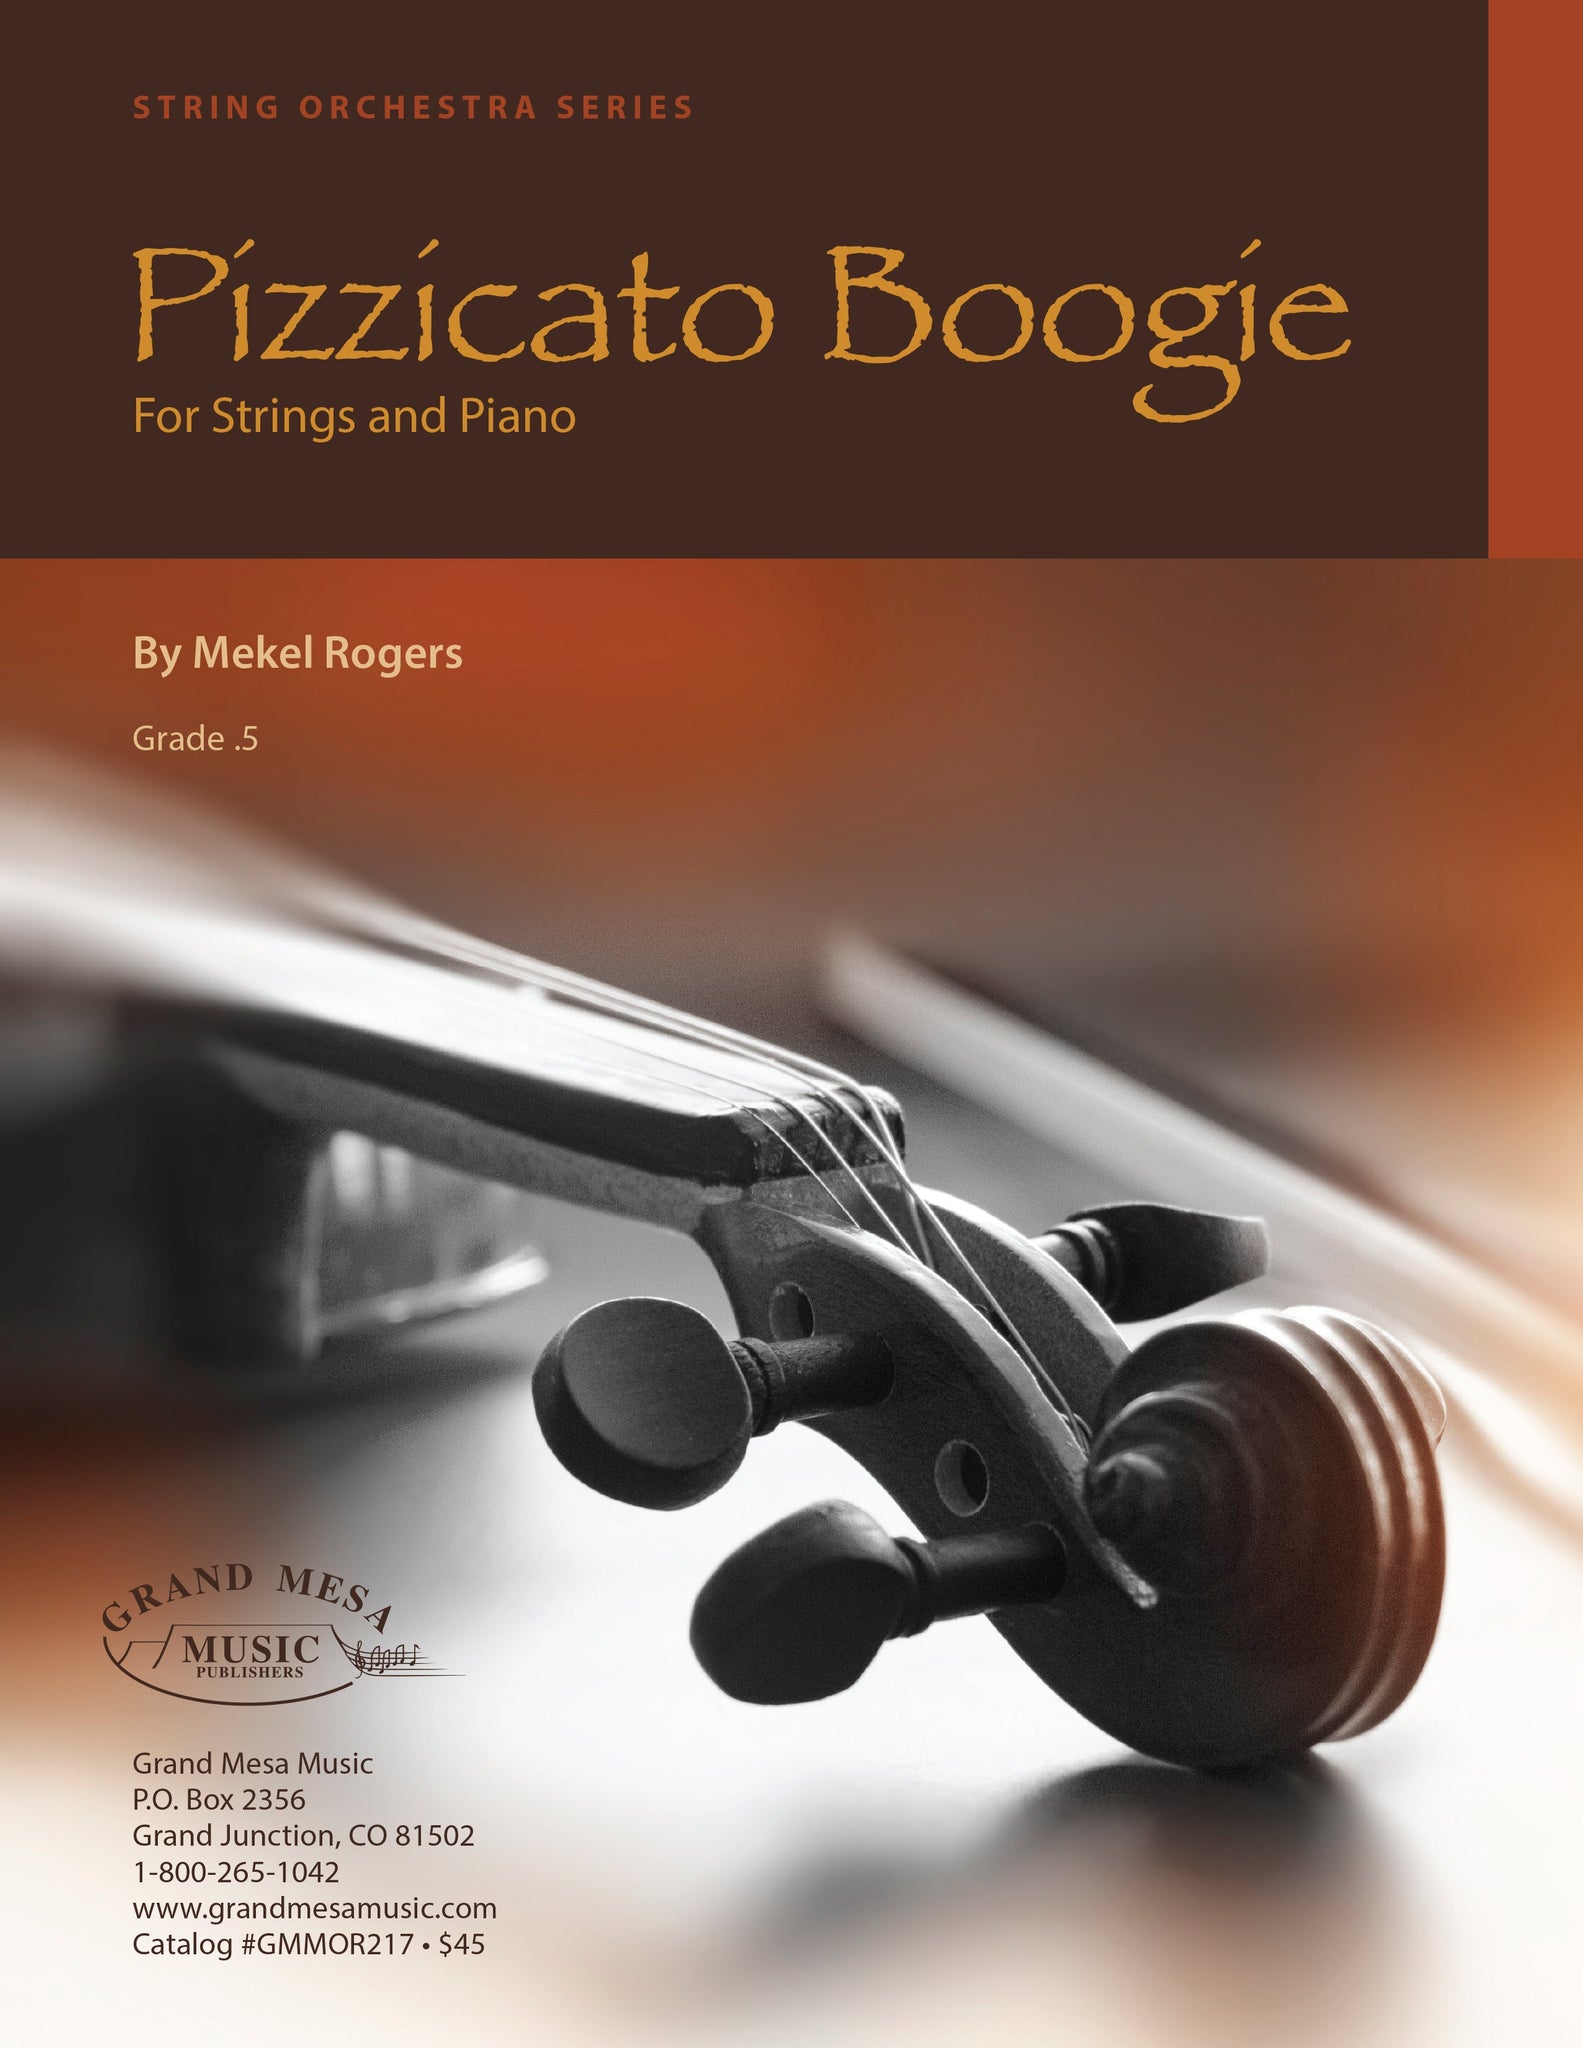 Strings sheet music cover of Pizzicato Boogie, composed by Mekel Rogers.